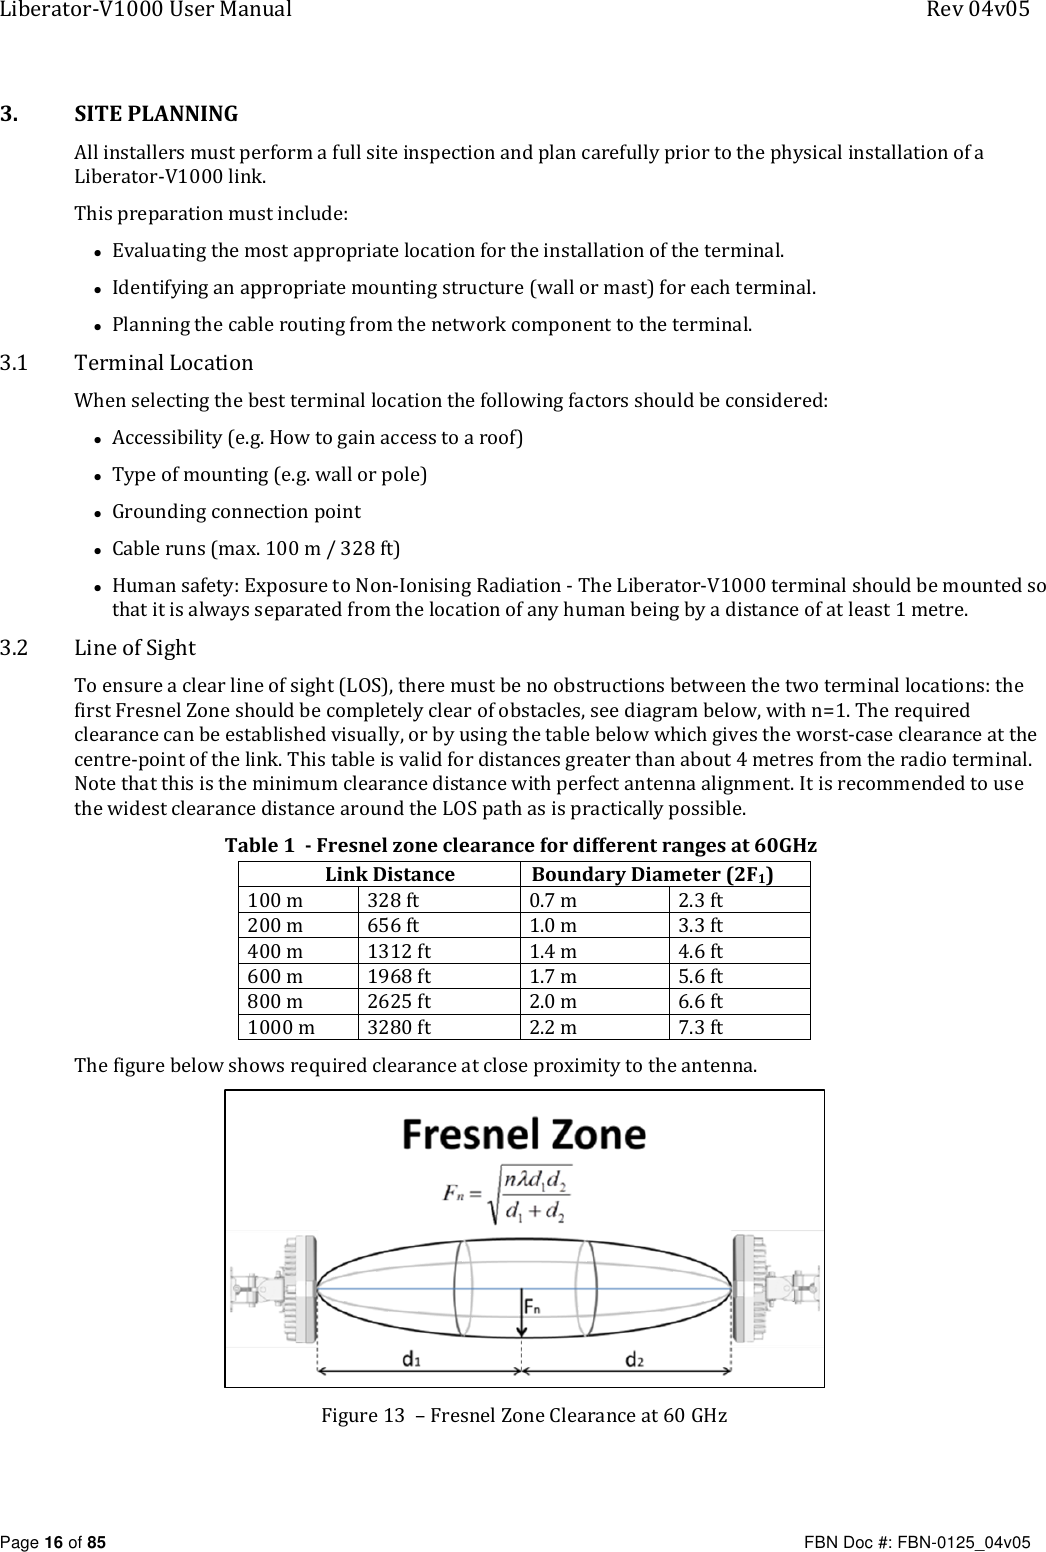 Liberator-V1000 User Manual  Rev 04v05     Page 16 of 85   FBN Doc #: FBN-0125_04v05 3. SITE PLANNING All installers must perform a full site inspection and plan carefully prior to the physical installation of a Liberator-V1000 link. This preparation must include: • Evaluating the most appropriate location for the installation of the terminal. • Identifying an appropriate mounting structure (wall or mast) for each terminal. • Planning the cable routing from the network component to the terminal. 3.1 Terminal Location When selecting the best terminal location the following factors should be considered: • Accessibility (e.g. How to gain access to a roof)  • Type of mounting (e.g. wall or pole)  • Grounding connection point  • Cable runs (max. 100 m / 328 ft)  • Human safety: Exposure to Non-Ionising Radiation - The Liberator-V1000 terminal should be mounted so that it is always separated from the location of any human being by a distance of at least 1 metre. 3.2 Line of Sight To ensure a clear line of sight (LOS), there must be no obstructions between the two terminal locations: the first Fresnel Zone should be completely clear of obstacles, see diagram below, with n=1. The required clearance can be established visually, or by using the table below which gives the worst-case clearance at the centre-point of the link. This table is valid for distances greater than about 4 metres from the radio terminal. Note that this is the minimum clearance distance with perfect antenna alignment. It is recommended to use the widest clearance distance around the LOS path as is practically possible.   Table 1  - Fresnel zone clearance for different ranges at 60GHz Link Distance Boundary Diameter (2F1) 100 m 328 ft 0.7 m 2.3 ft 200 m 656 ft 1.0 m 3.3 ft 400 m 1312 ft 1.4 m 4.6 ft 600 m 1968 ft 1.7 m 5.6 ft 800 m 2625 ft 2.0 m 6.6 ft 1000 m 3280 ft 2.2 m 7.3 ft The figure below shows required clearance at close proximity to the antenna.  Figure 13  – Fresnel Zone Clearance at 60 GHz 